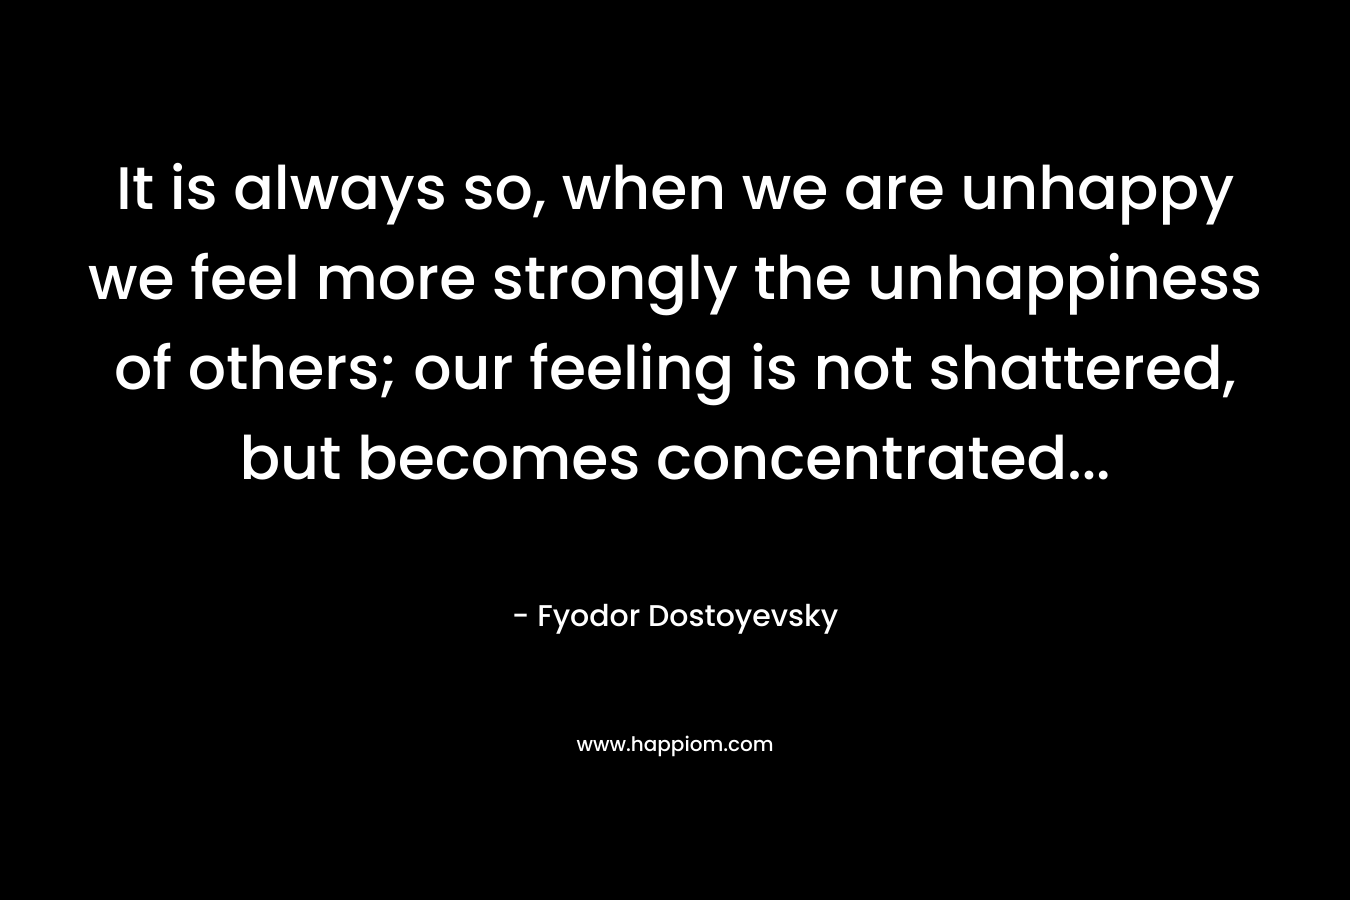 It is always so, when we are unhappy we feel more strongly the unhappiness of others; our feeling is not shattered, but becomes concentrated… – Fyodor Dostoyevsky